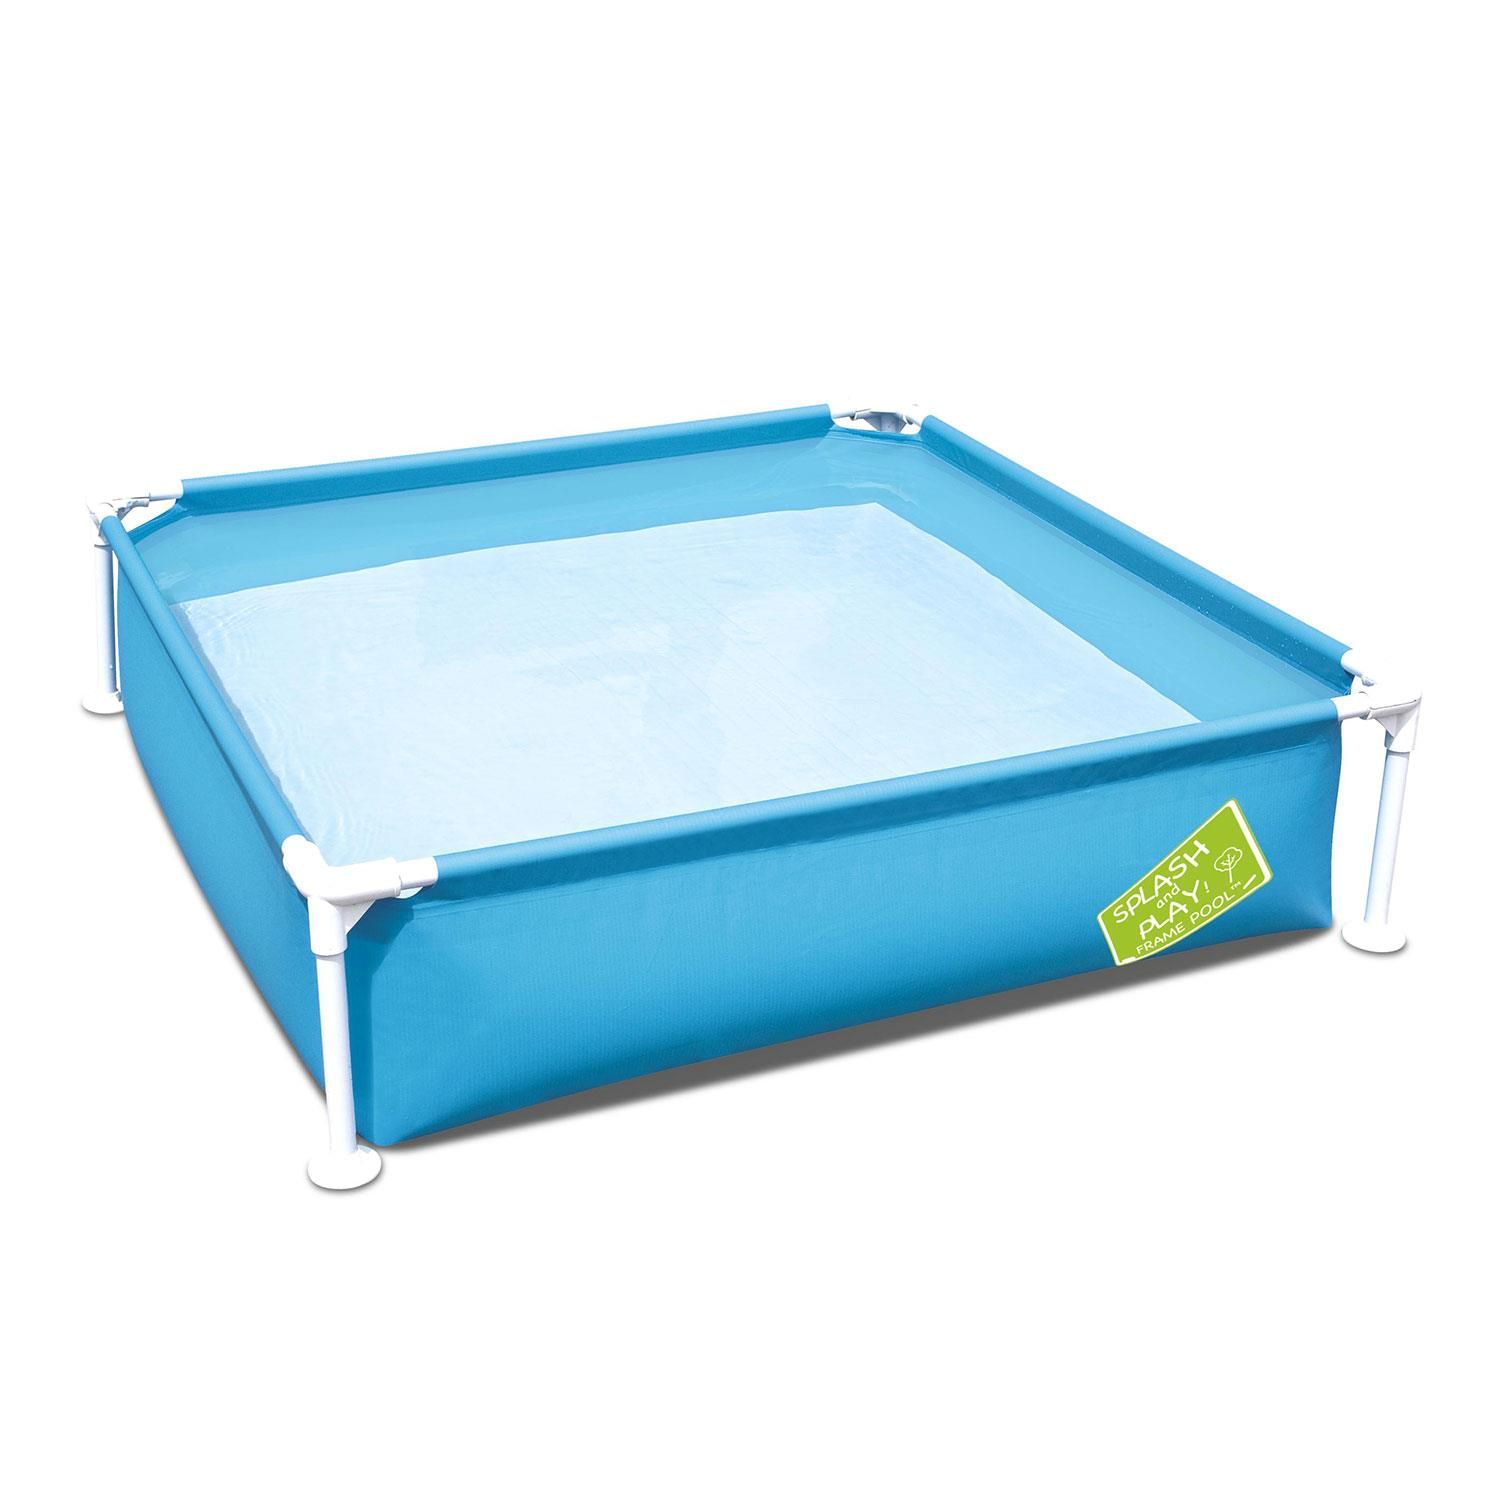 Bestway Splash and Play Rectangular Blue Frame Pool 48'' x 48'' x 12'', 365L.  Designed to get kids moving, grooving and out of the house, the Bestway My First Frame Pool is quality-tested and puts the focus back on fun! This pool is great for kids to splash and play in. This pool is easy to set up and is constructed of rust-resistant metal frames. The pool is easy to take down for storage. Splashing in the sun has never been more fun than with My First Frame Pool!

Features : 
Easy set up
Corrosion resistant metal frames
Easy to take down for off-season storage
Rectangular shape provides more area for swimming and playing
Water Capacity (90%): 365L (96gal.)
Underwater adhesive repair patch 

Installation of Swimming Pool :
It is essential the pool is set up on solid, level ground. If the pool is set up on uneven ground it can cause collapse of the pool and flooding, causing serious personal injury and/or damage to personal property. Setting up on uneven ground will void the warranty and service claims.
Do not set up on driveways, decks, platforms, gravel or asphalt. Ground should be firm enough to withstand the pressure of the water; mud, sand, soft / loose soil or tar are not suitable.
The ground must be cleared of all objects and debris including stones and twigs.


Box Contains :
1 x Bestway 48